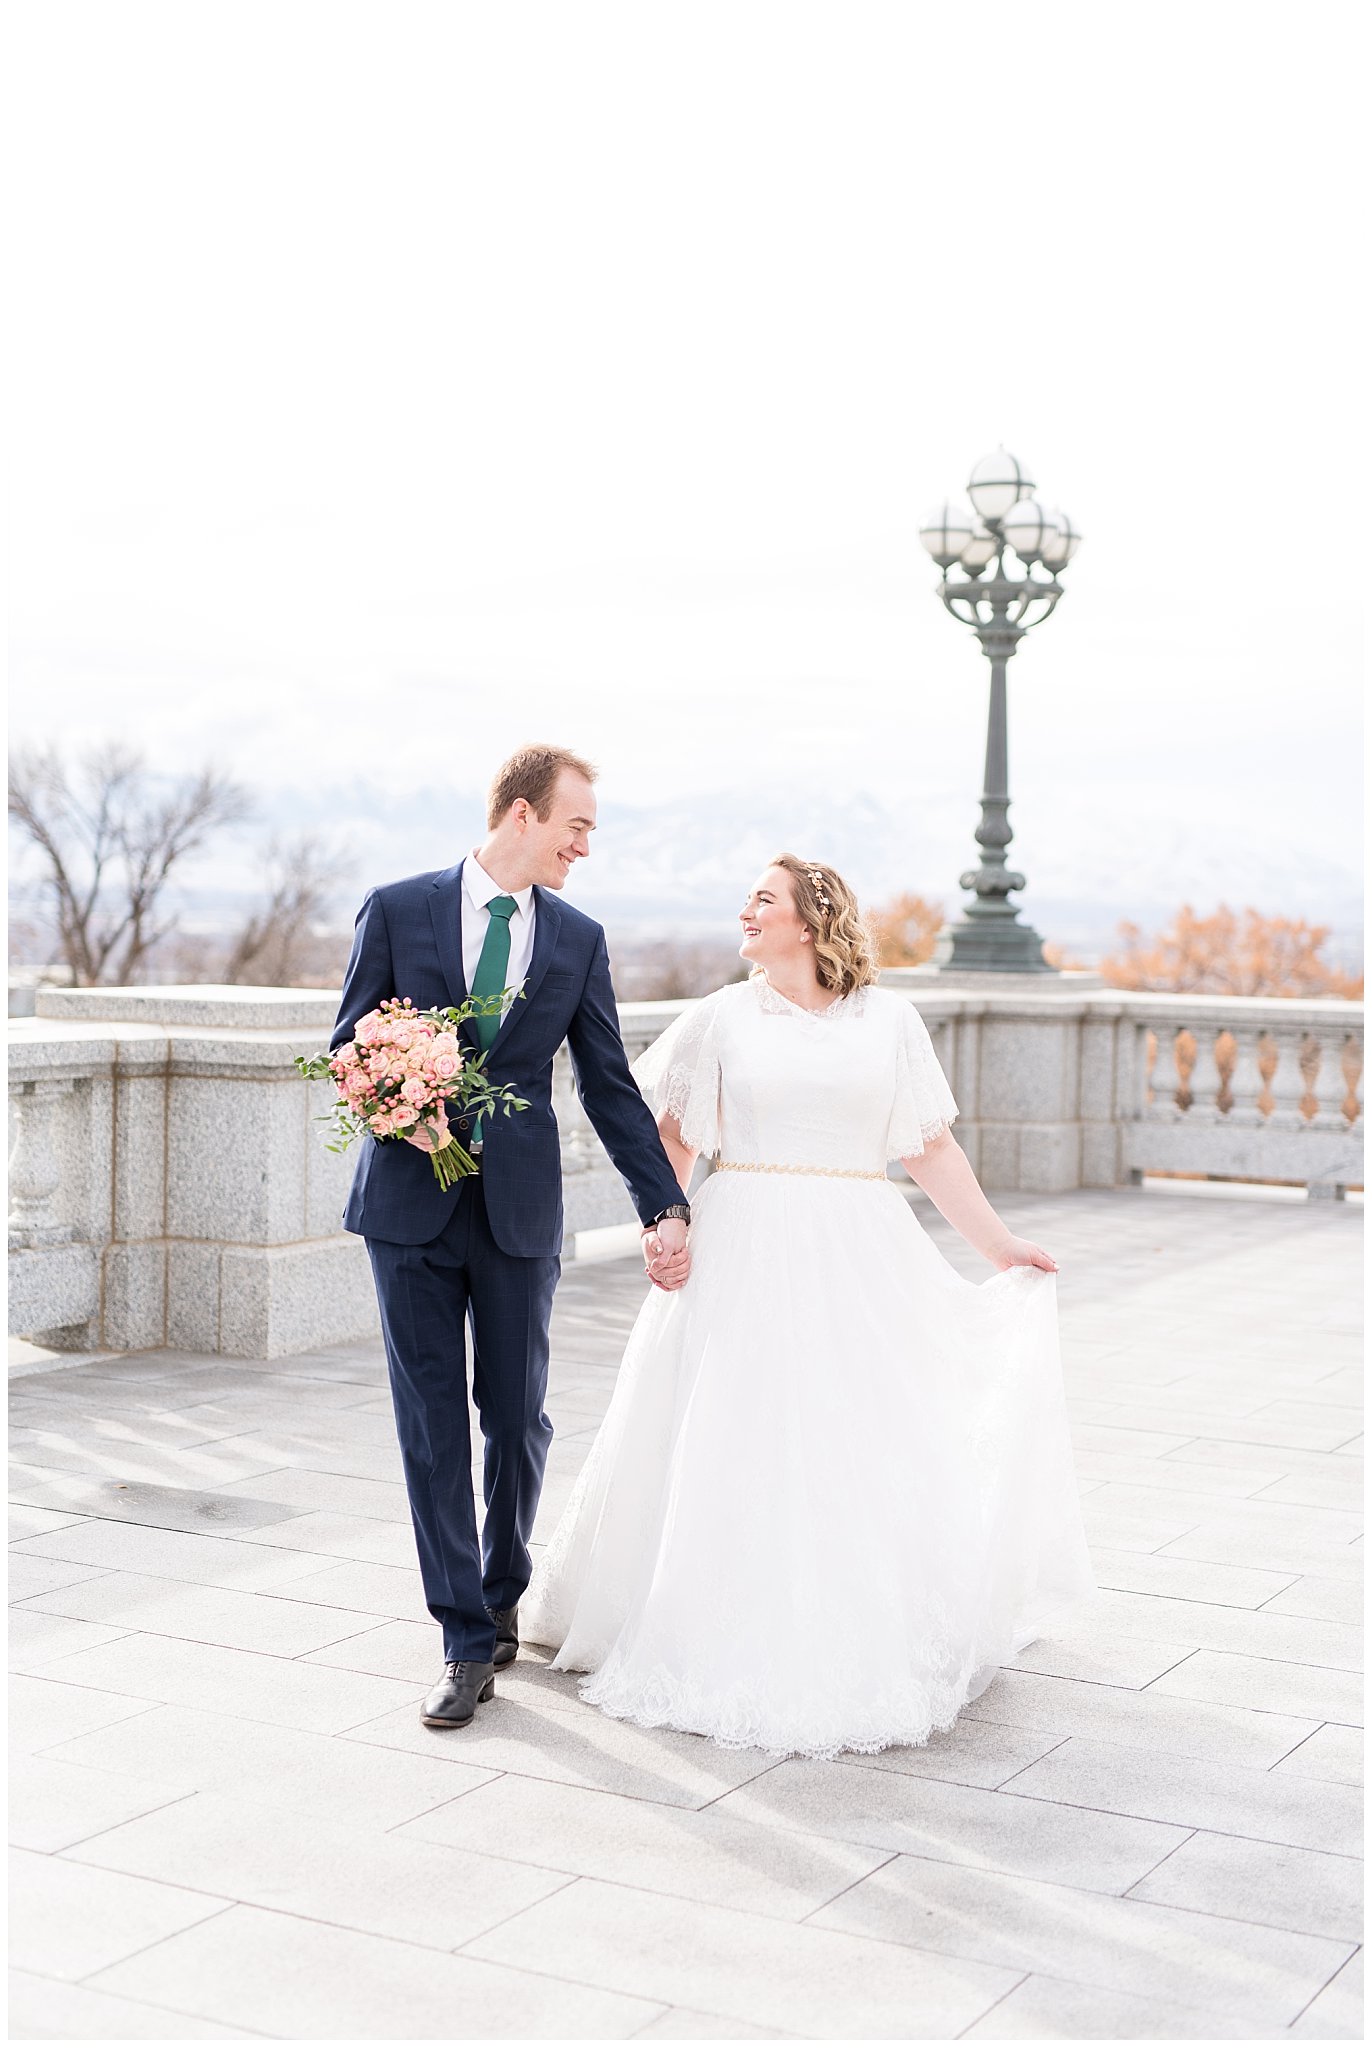 Bride and groom walking with groom holding bouquet | Winter Formals at the Utah State Capitol | Utah Wedding Photography